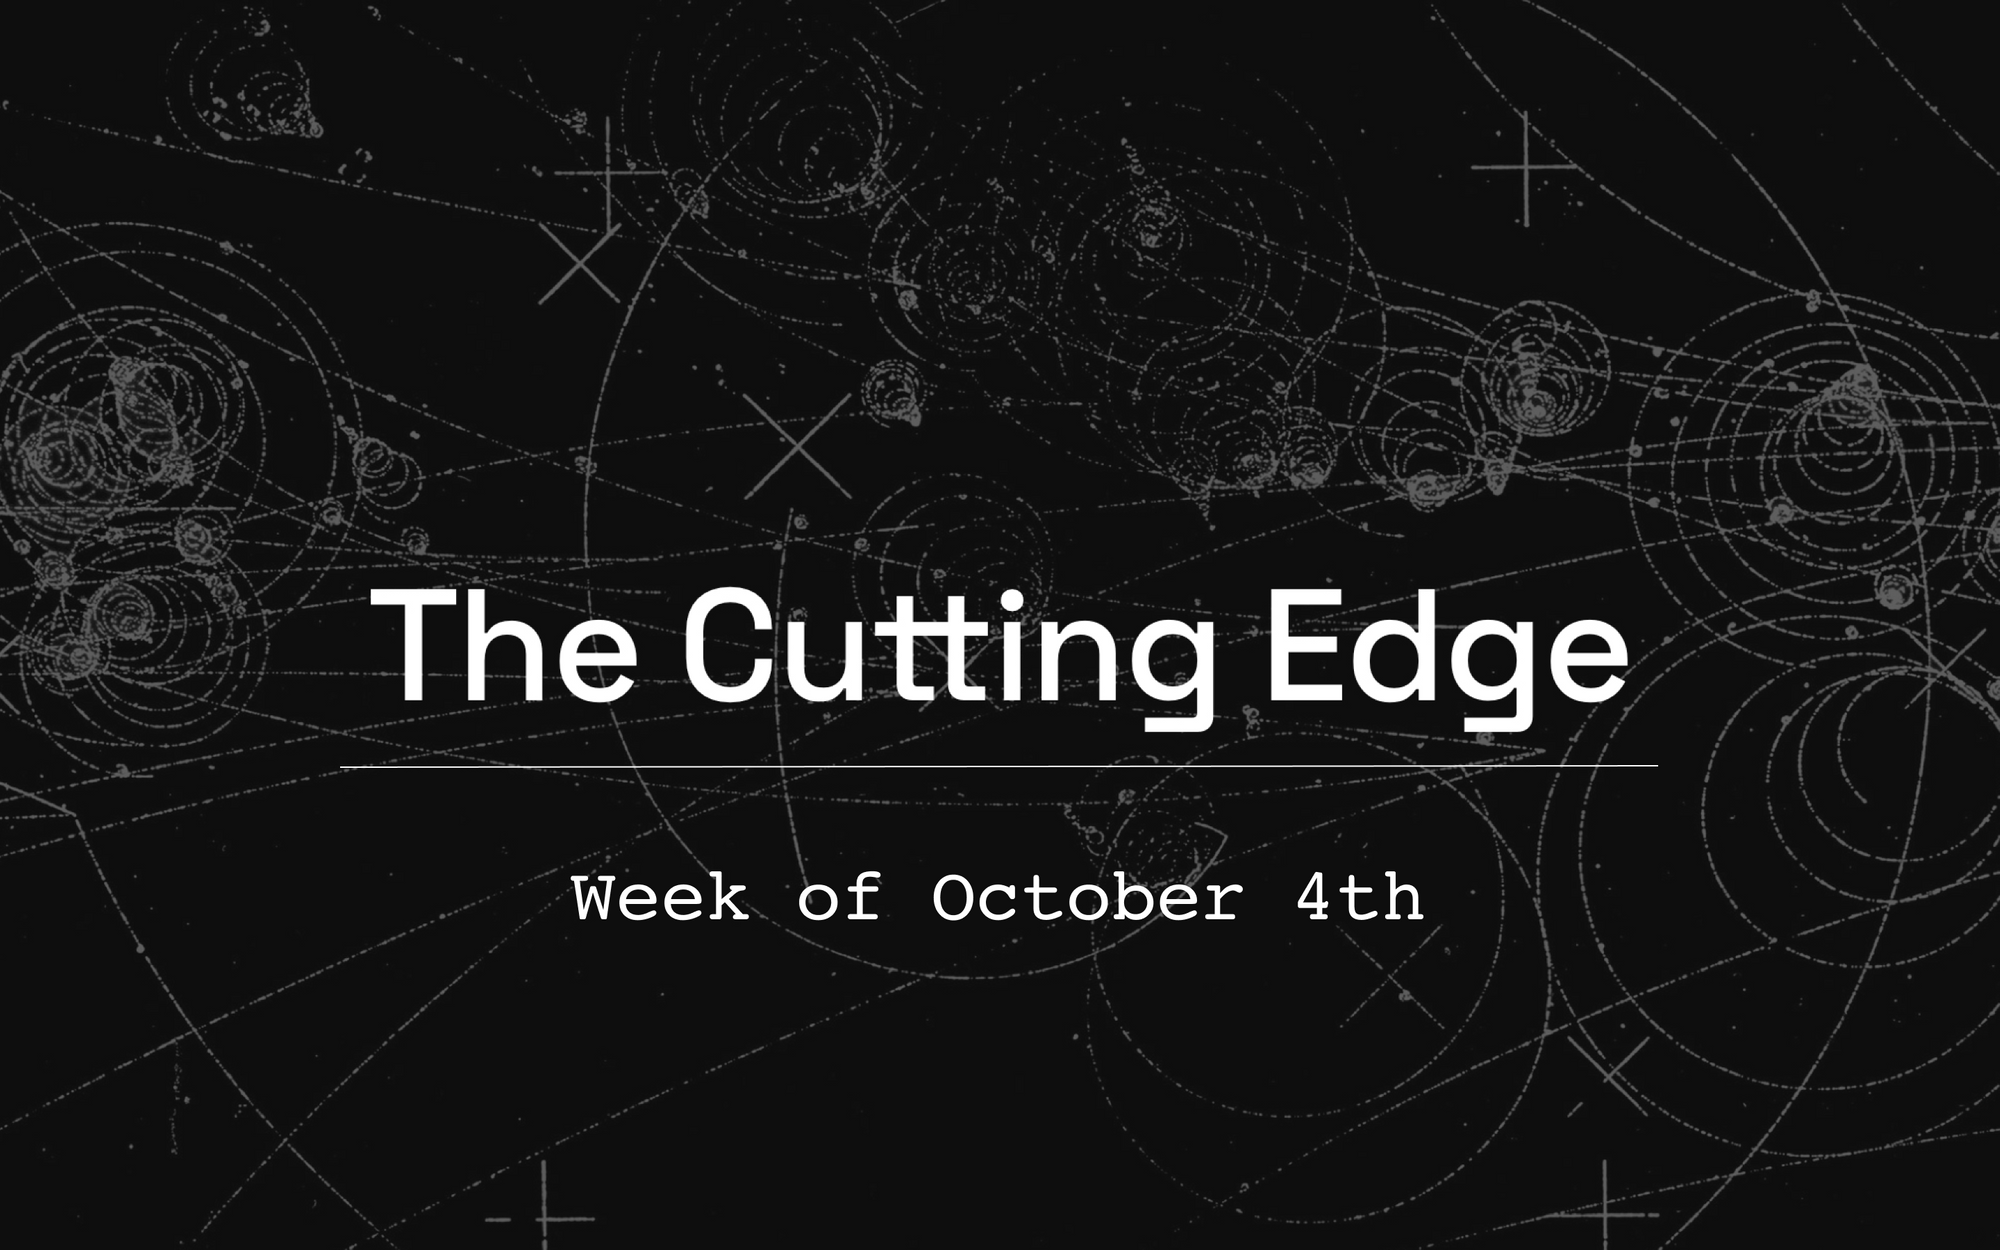 The Cutting Edge: Week of October 4th